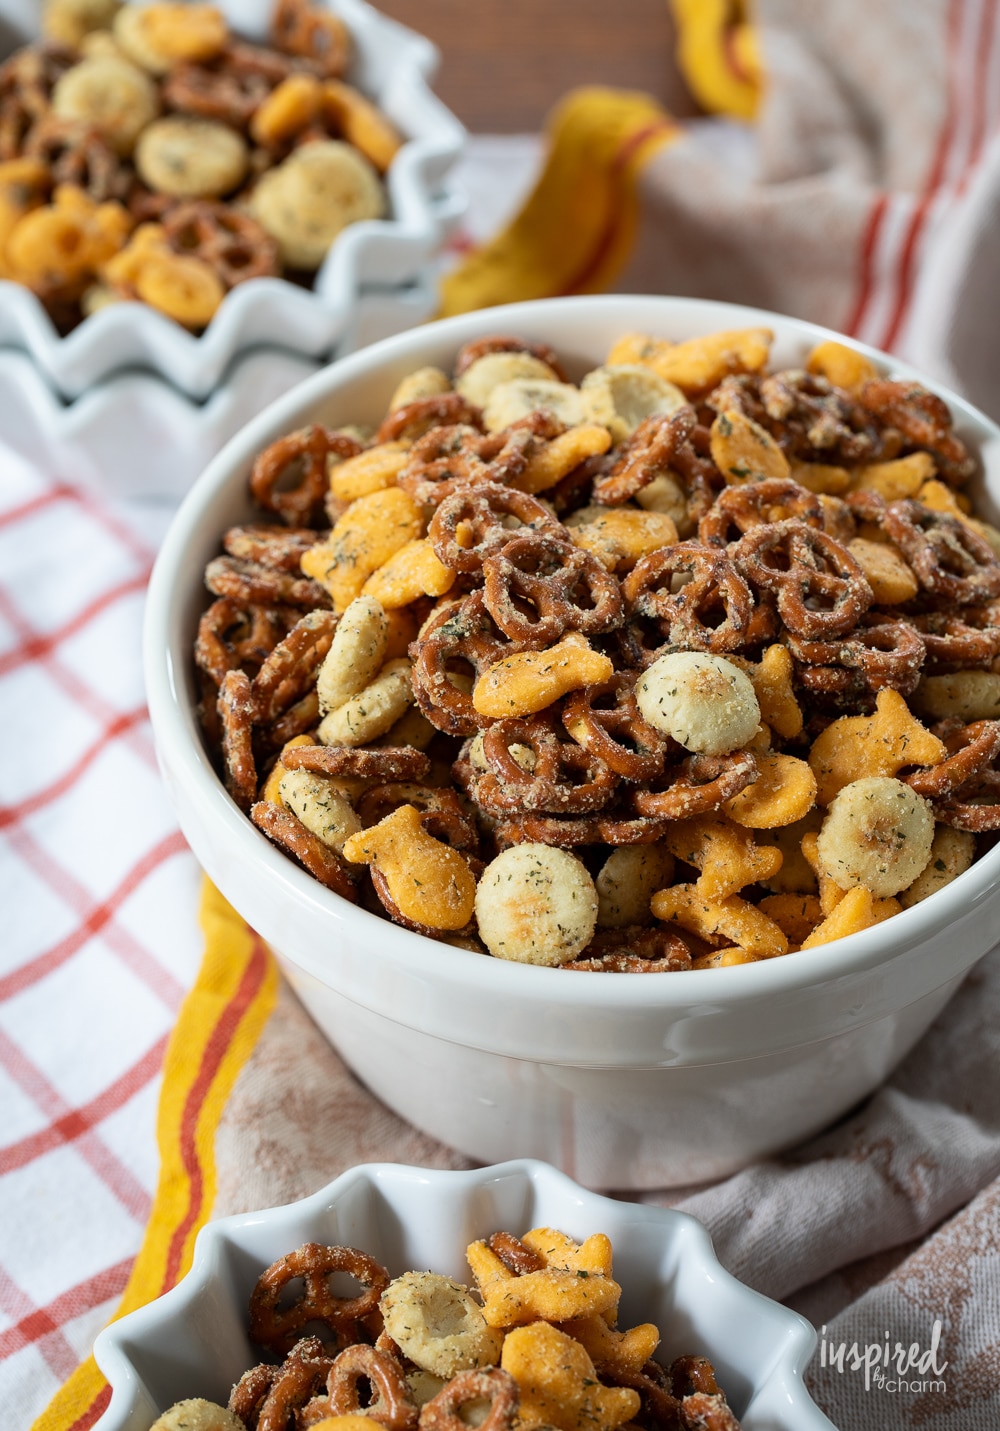 ranch pretzel snack mix in a large bowl and individual bowls.